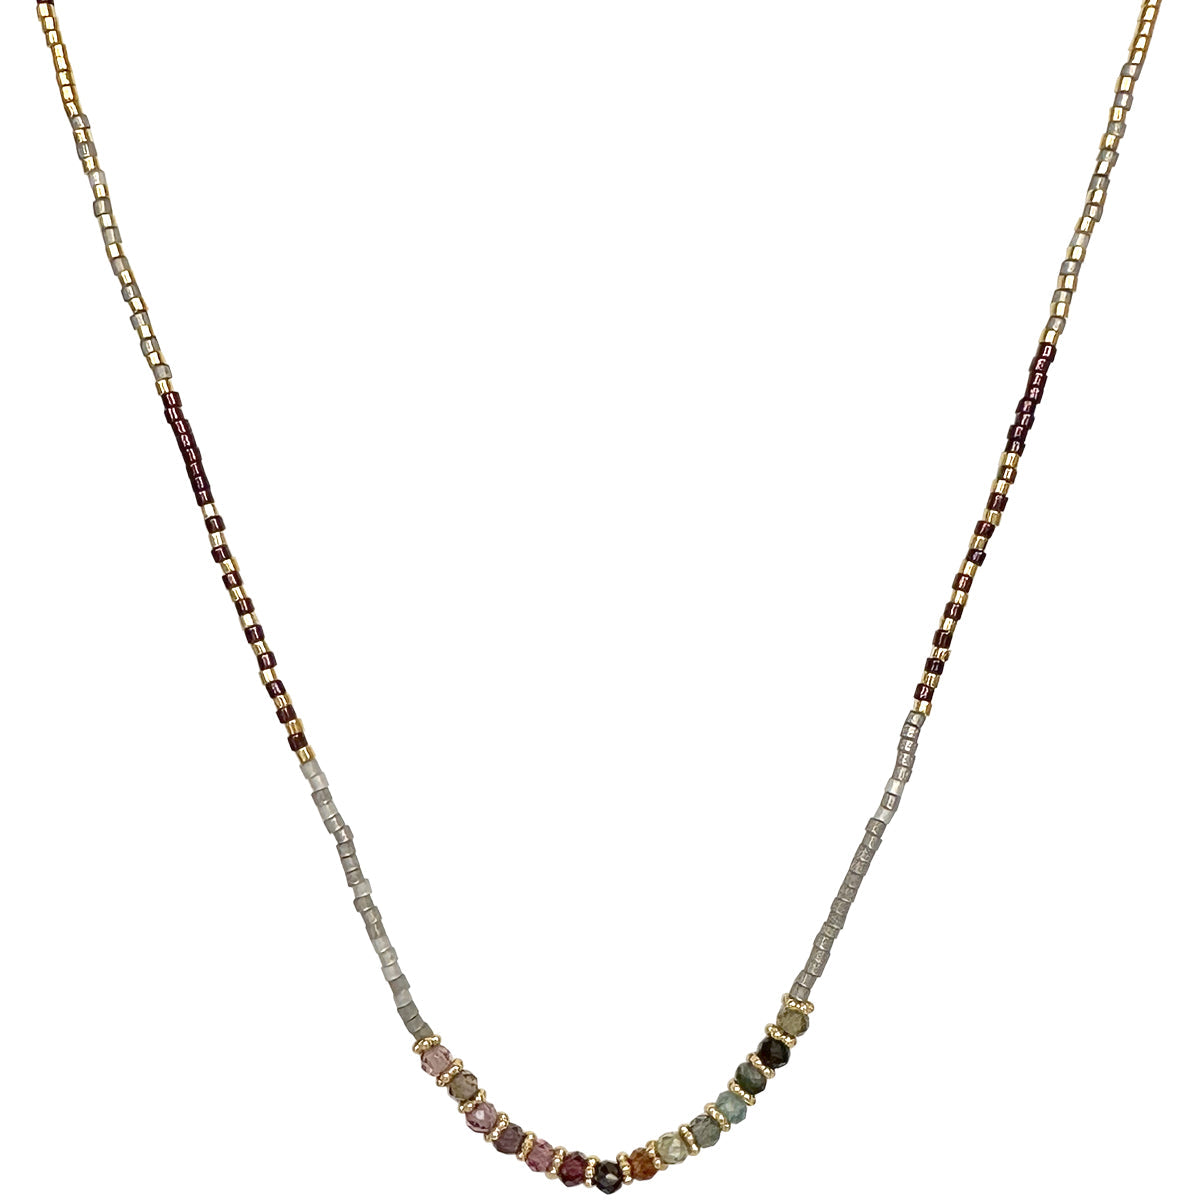 TUNDRA SAPPHIRE SEMI-PRECIOUS STONES NECKLACE WITH GOLD DETAILS